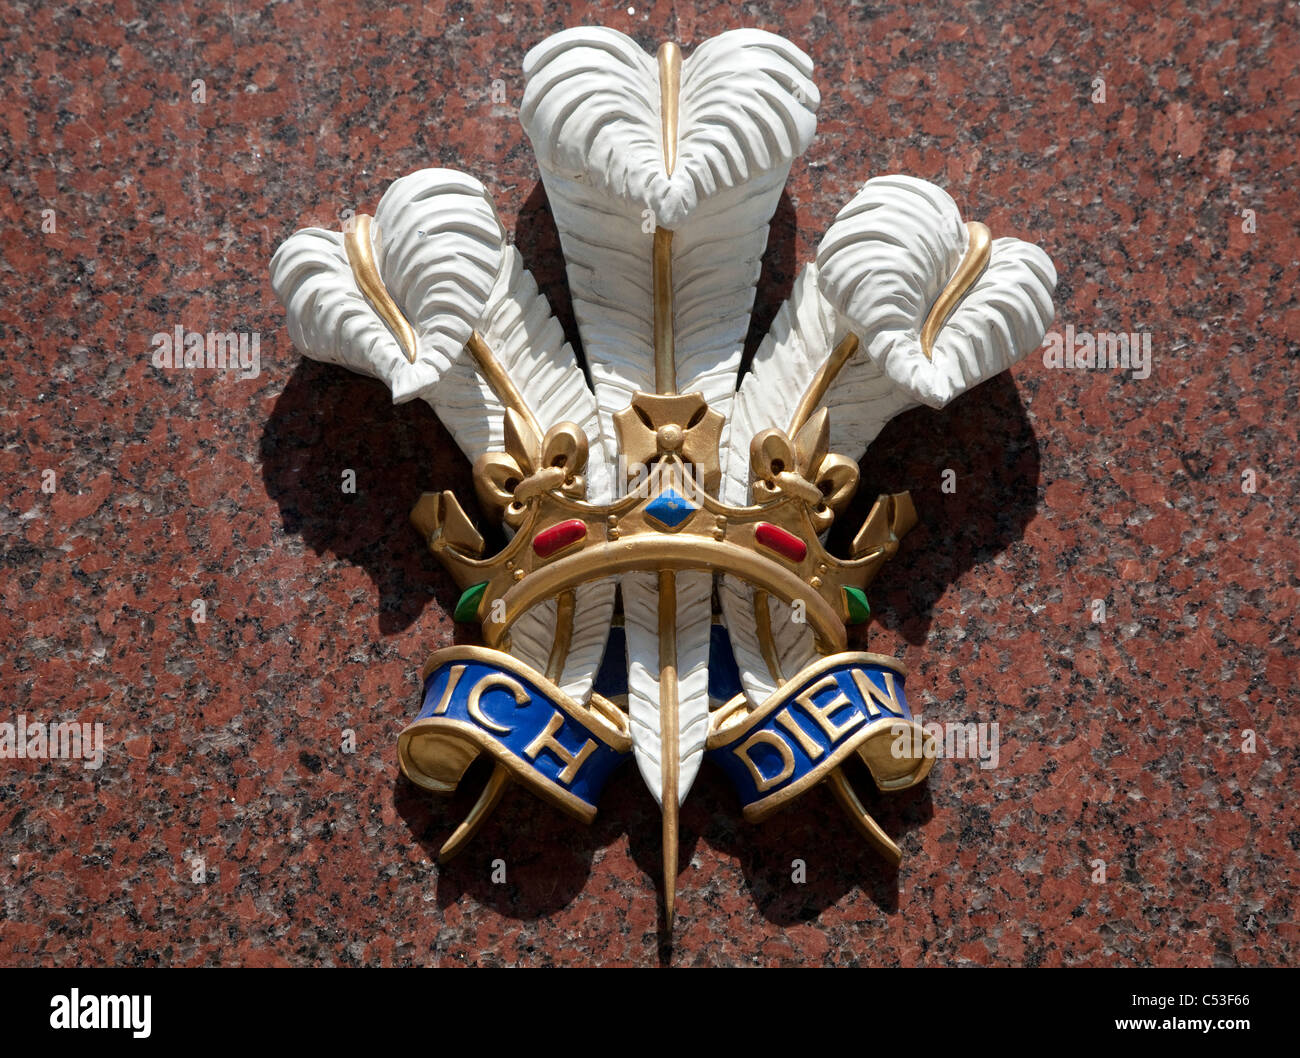 Prince of Wales's feathers and motto Ich Dien (I Serve) on Bentley & Skinner jewellers, London Stock Photo